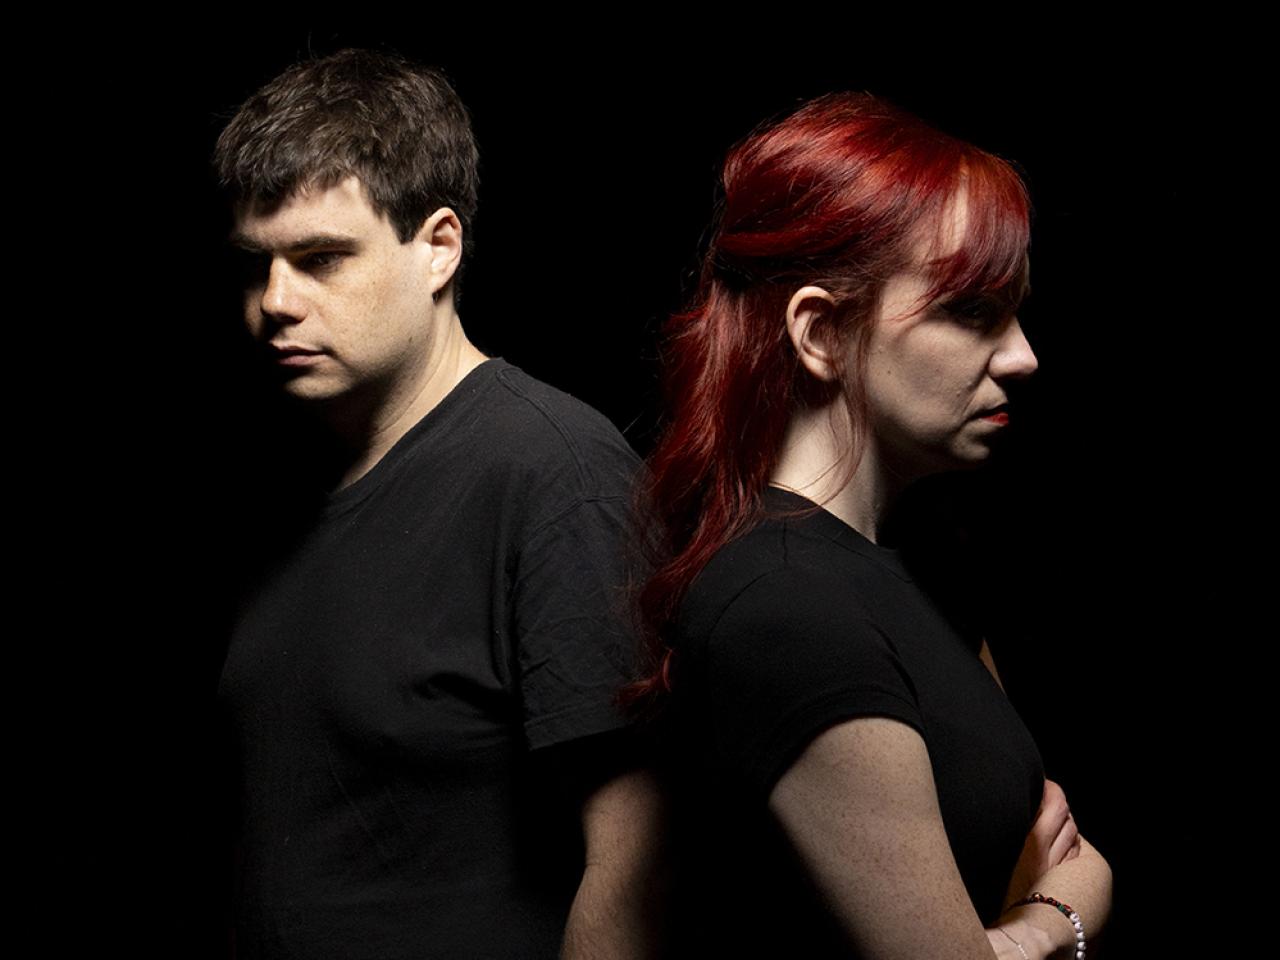 A man and woman stand back to back with unhappy expressions in a black space.